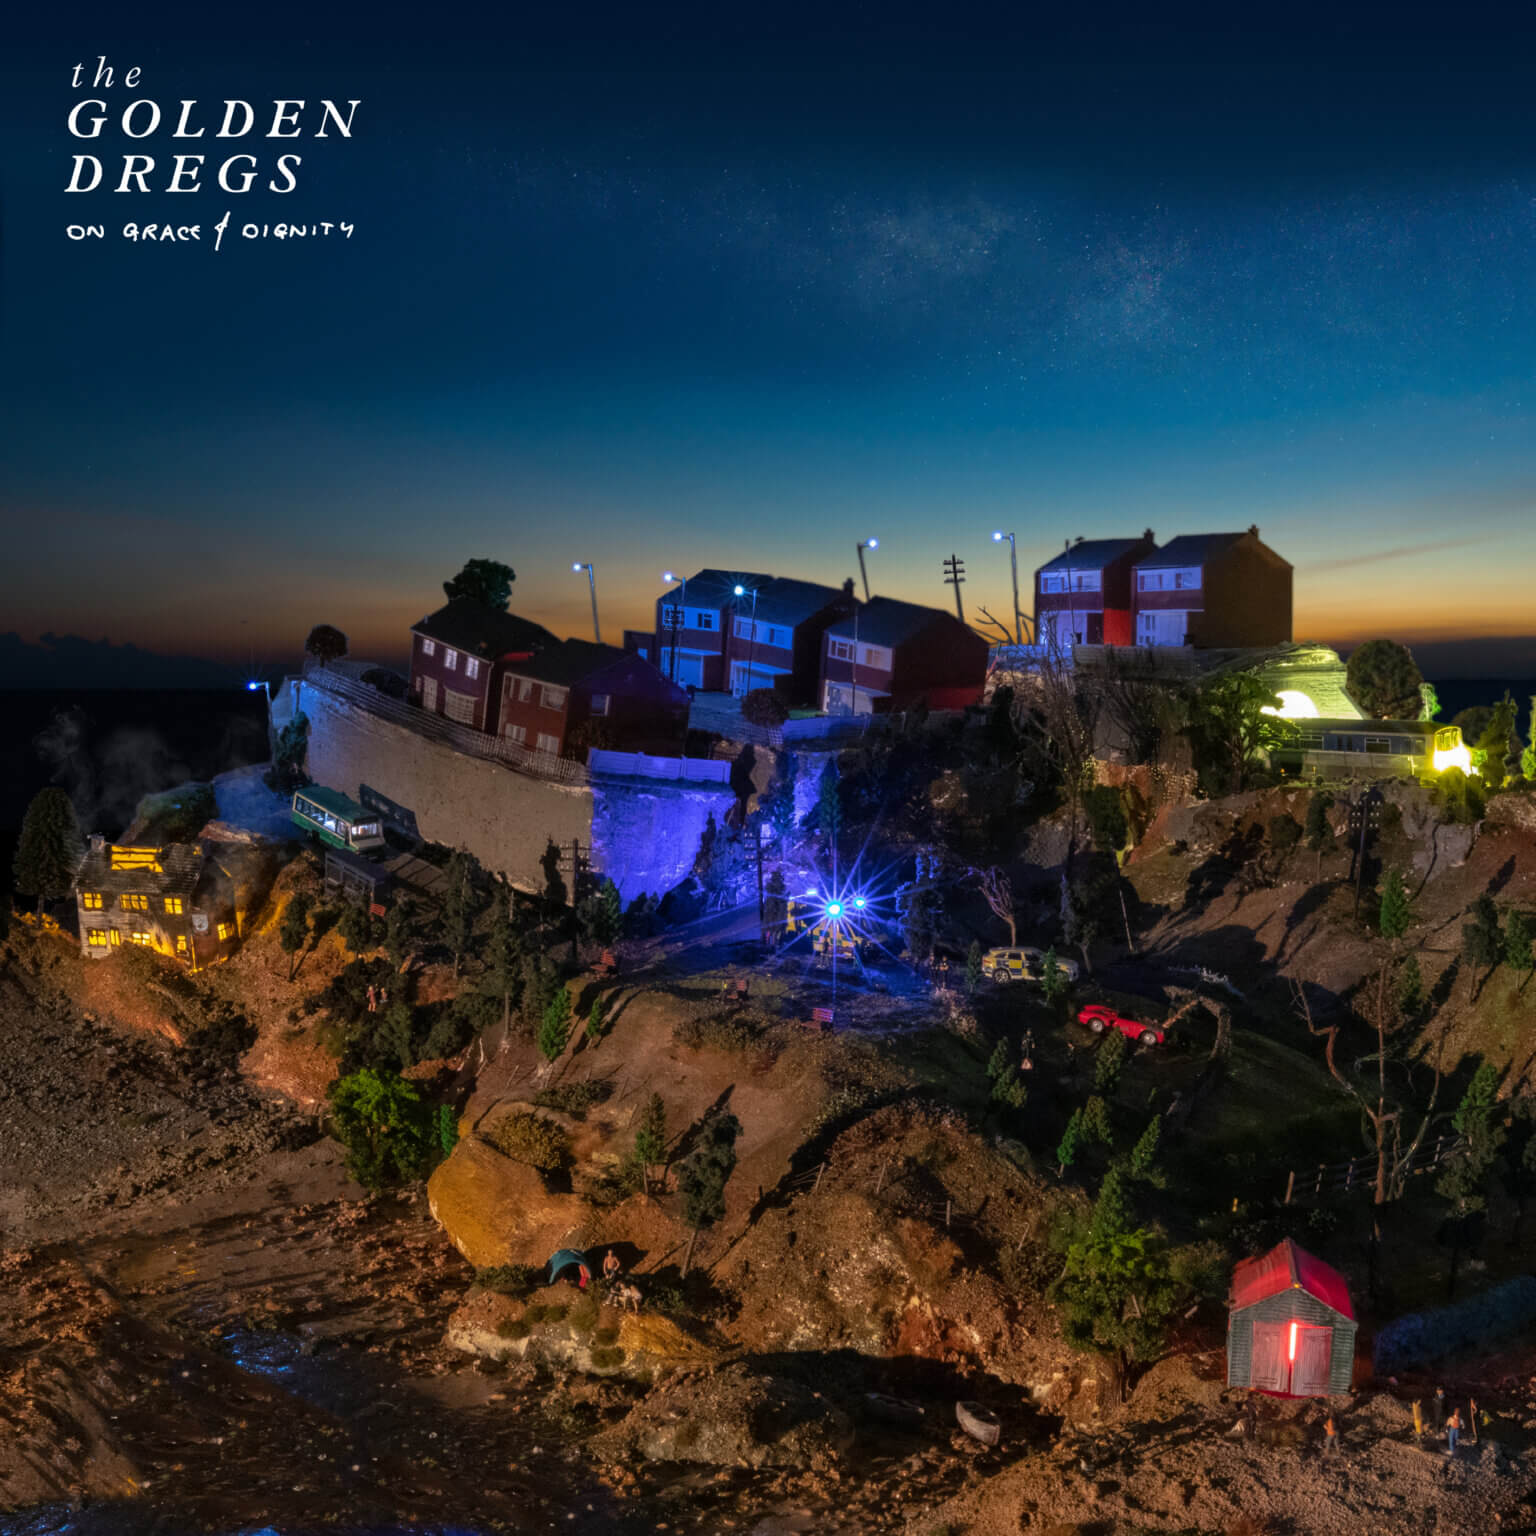 the Golden Dregs announce new album On Grace &amp; Dignity. The project of UK artist Benjamin Woods, album drops on February 23, 2023 via 4AD